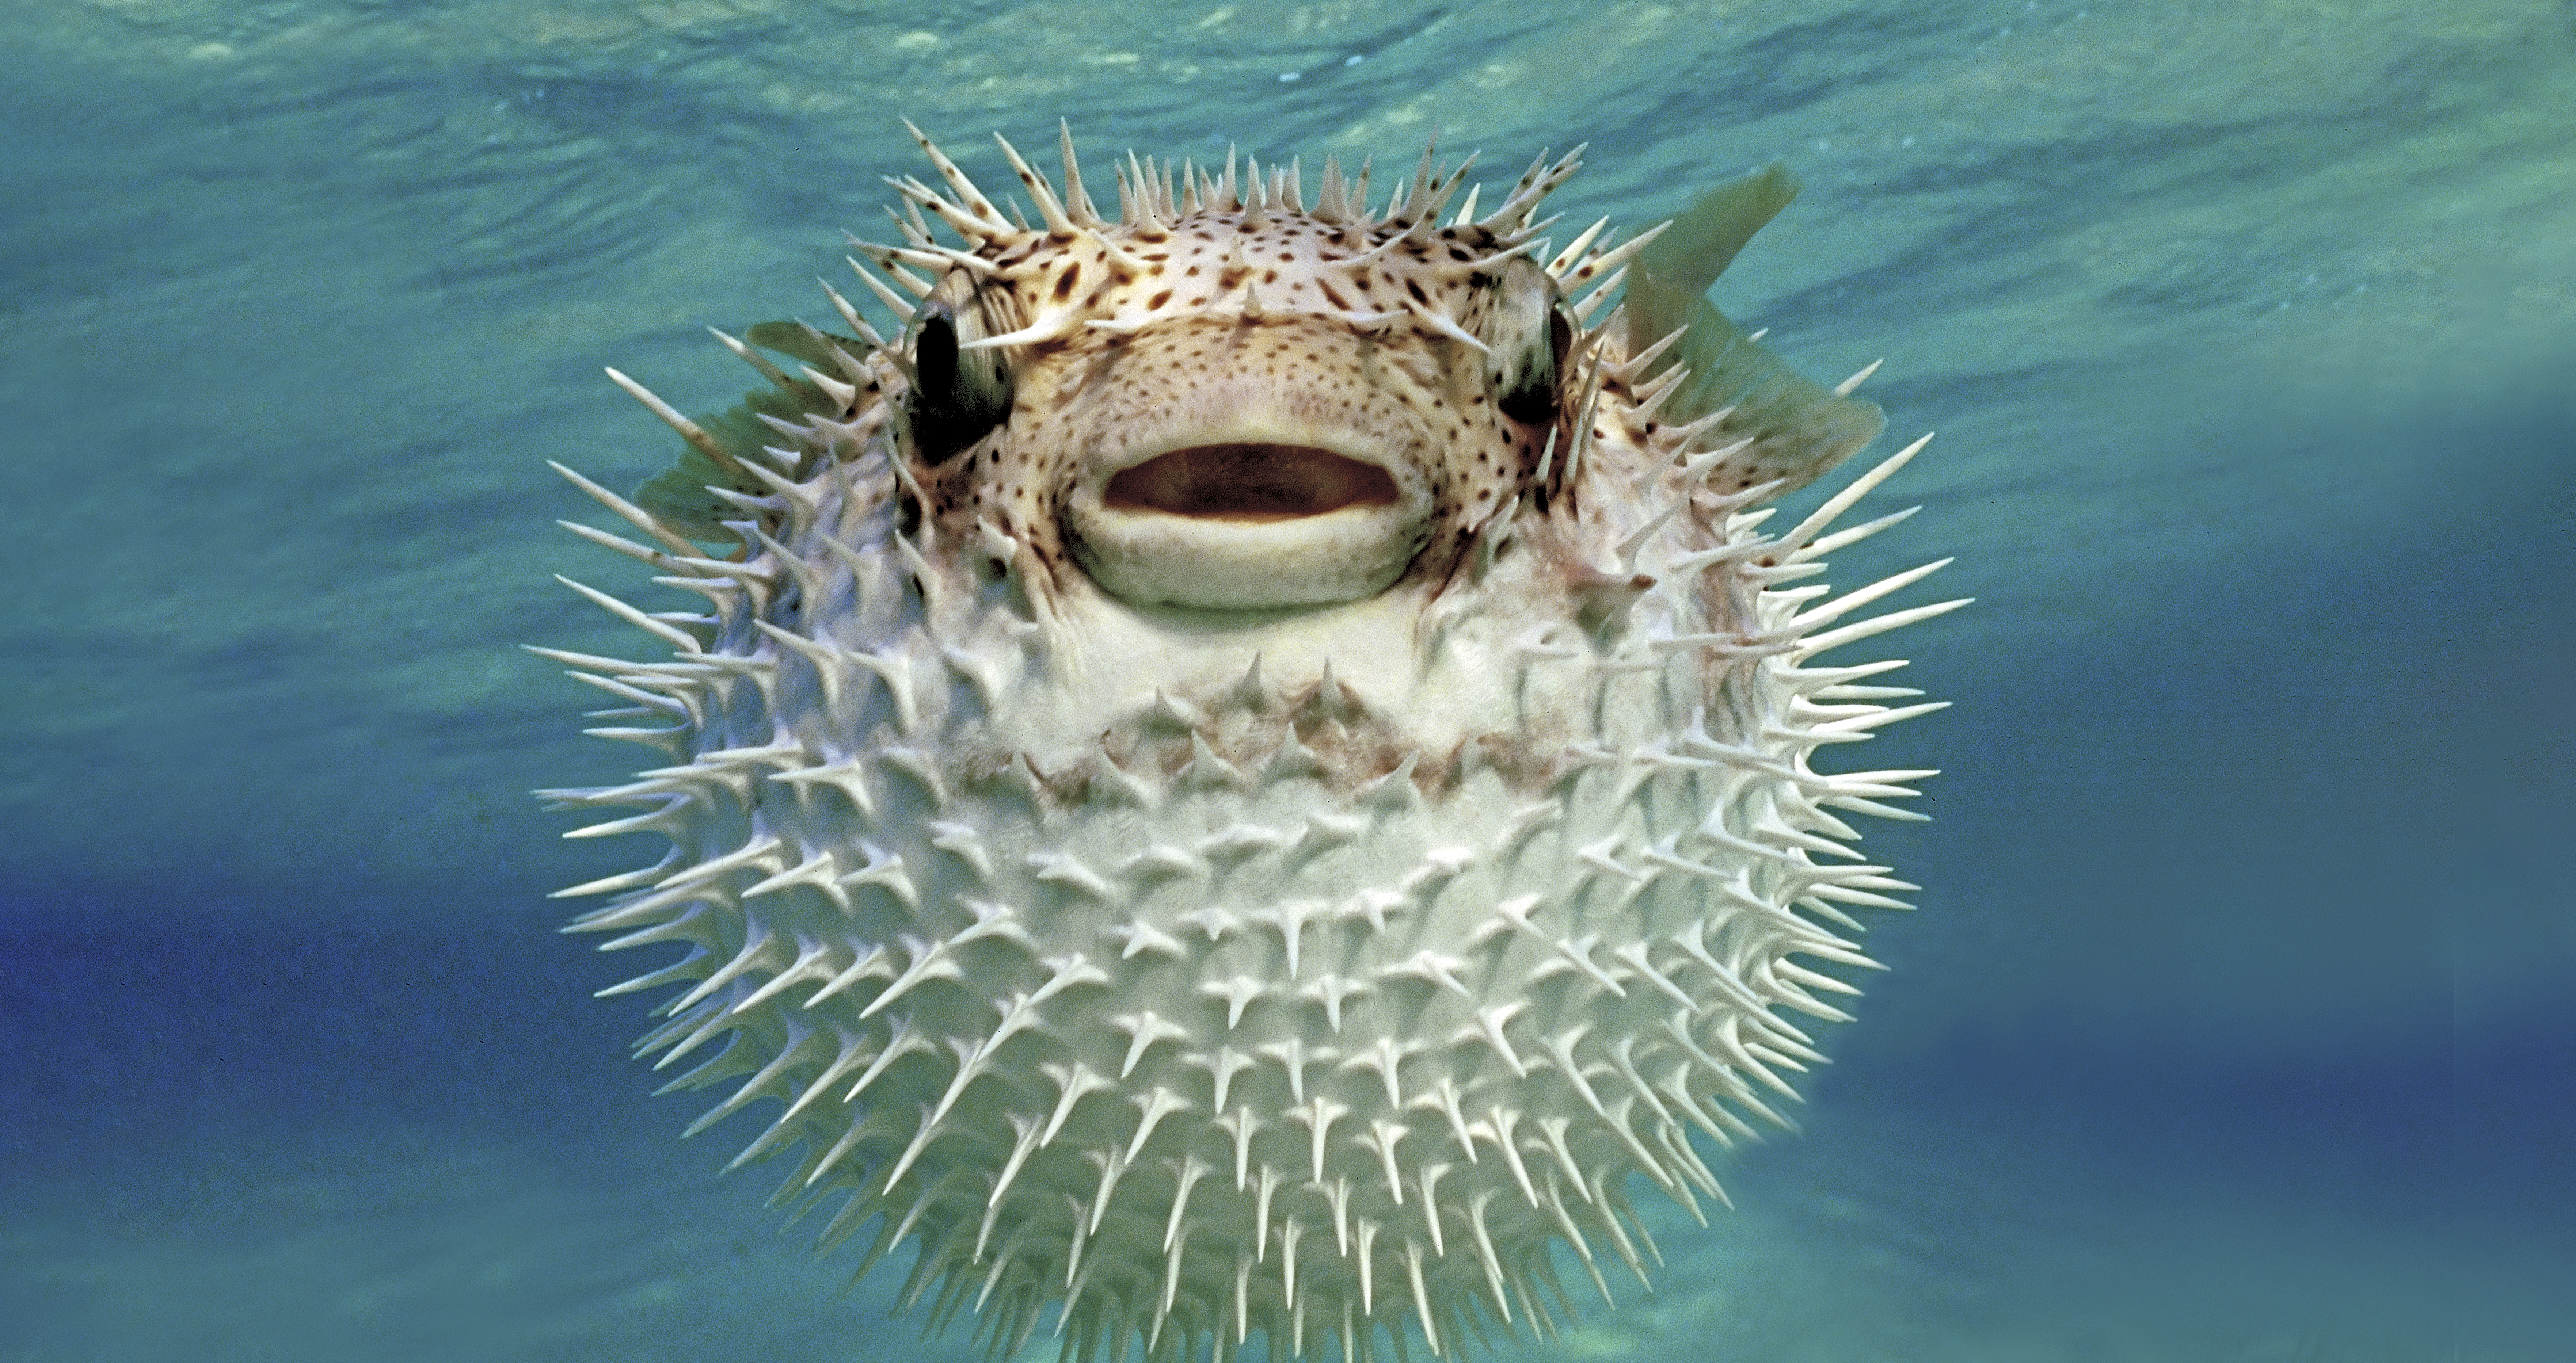 Puffer Fish - Credit: Todd Gustafson. Download a zipped file of promotional materials in the Additional Assets section below.